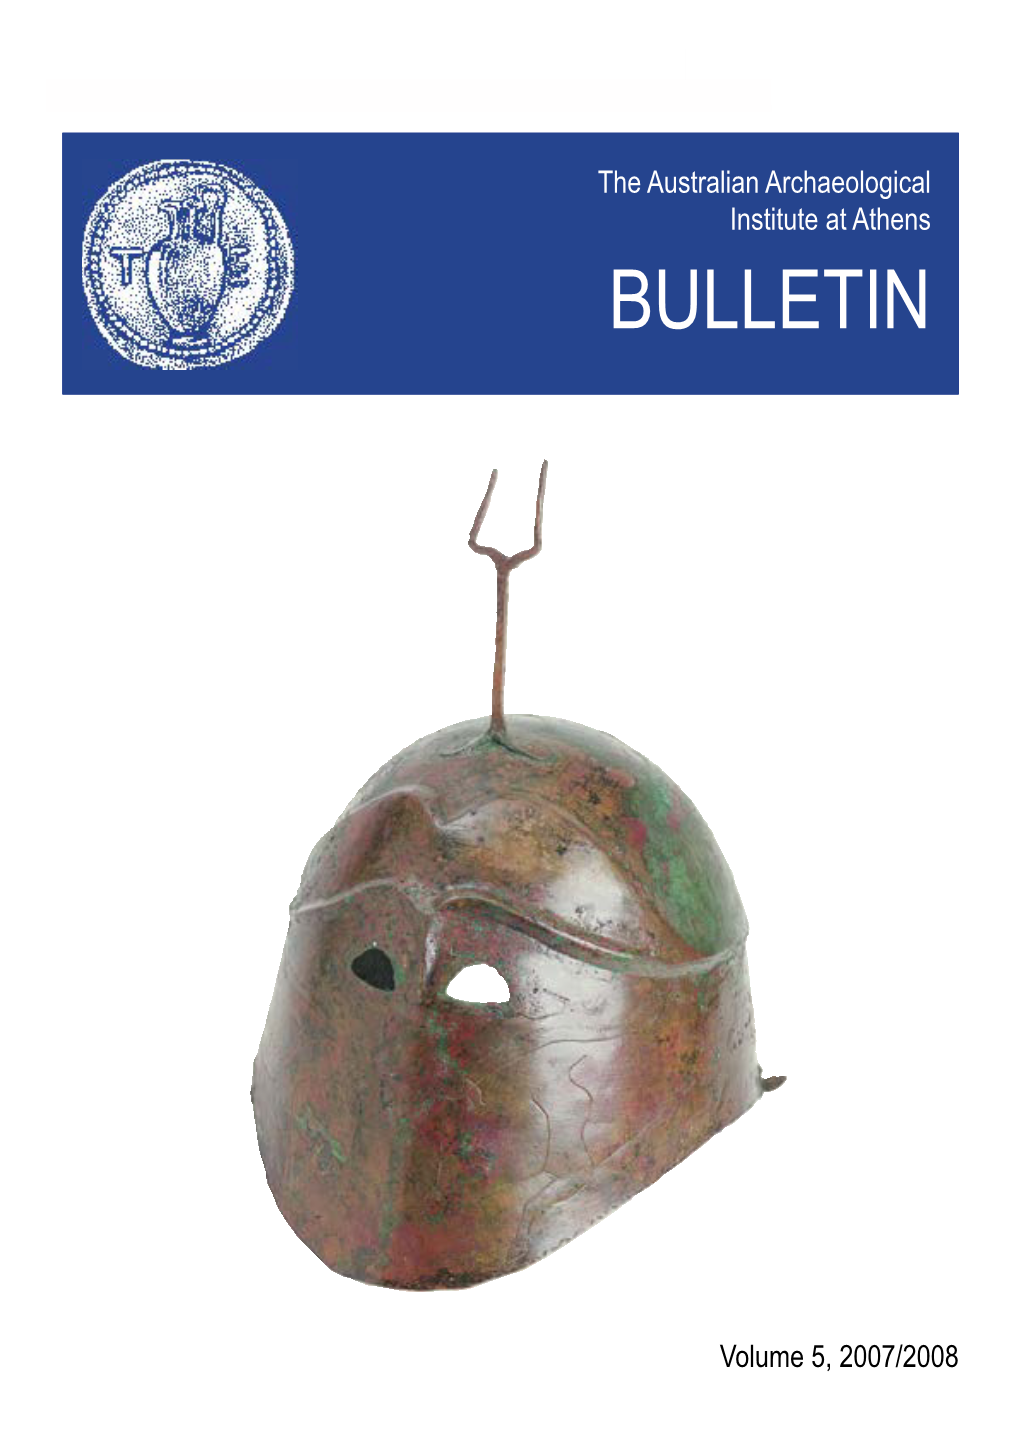 The Australian Archaeological Institute at Athens BULLETIN